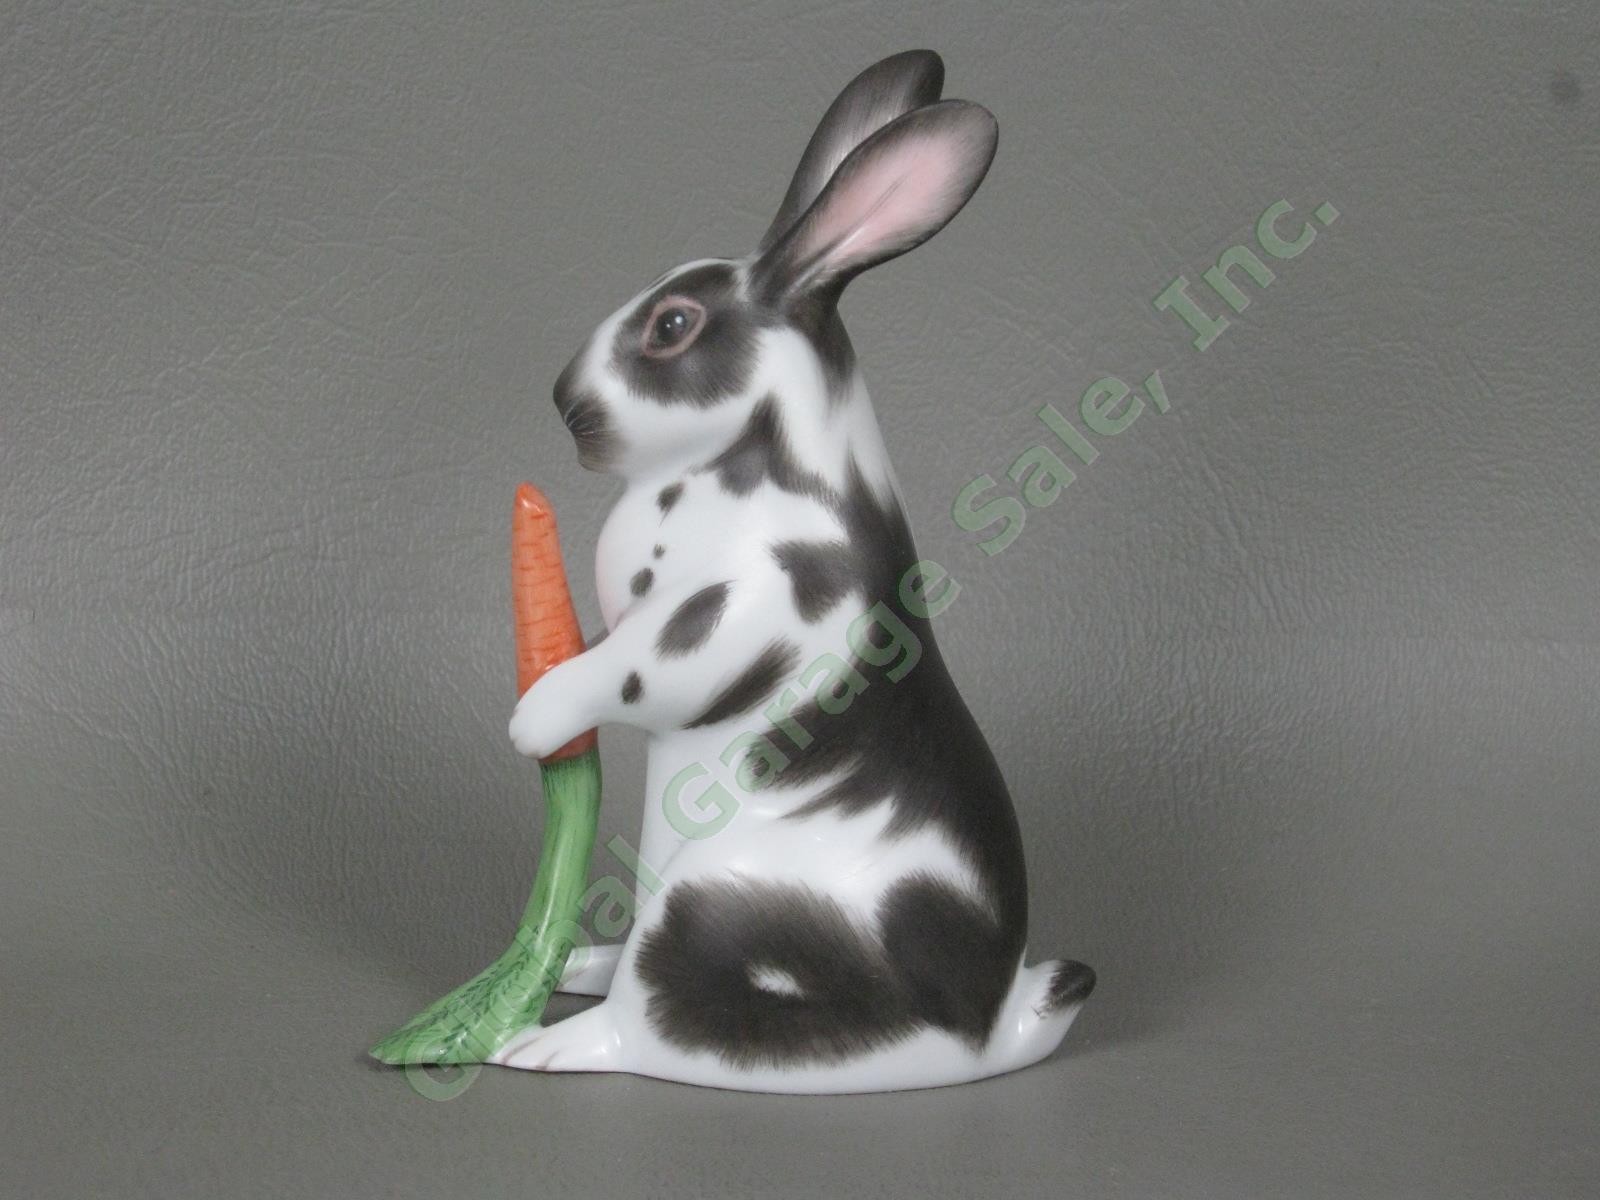 2005 Herend Black & White Porcelain 3.75" Bunny Rabbit With Carrot Figurine NR! 2